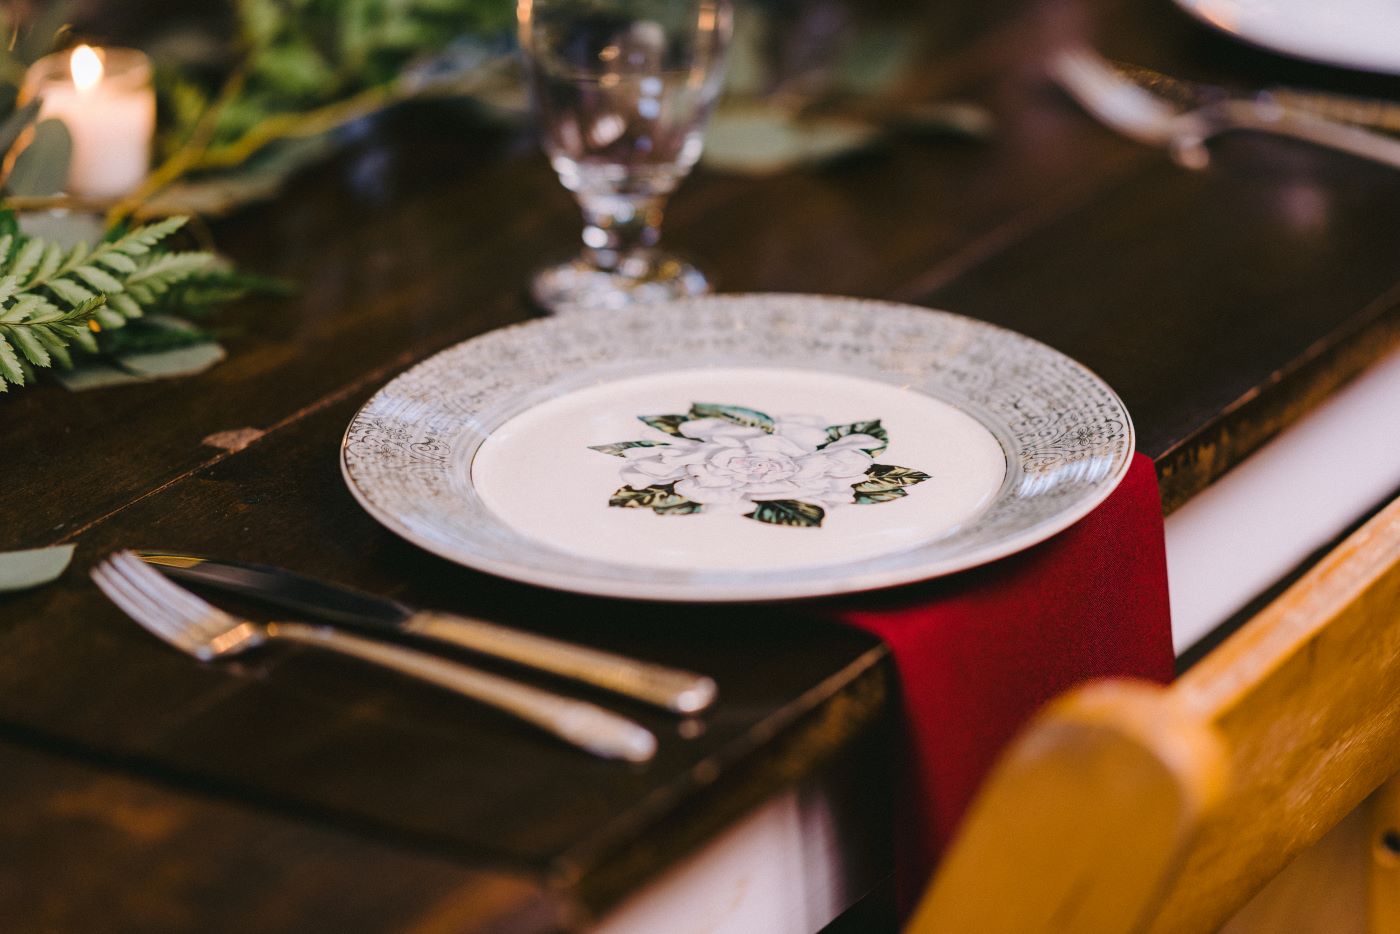 Plates For Your Wedding - Paper, Plastic, or China?